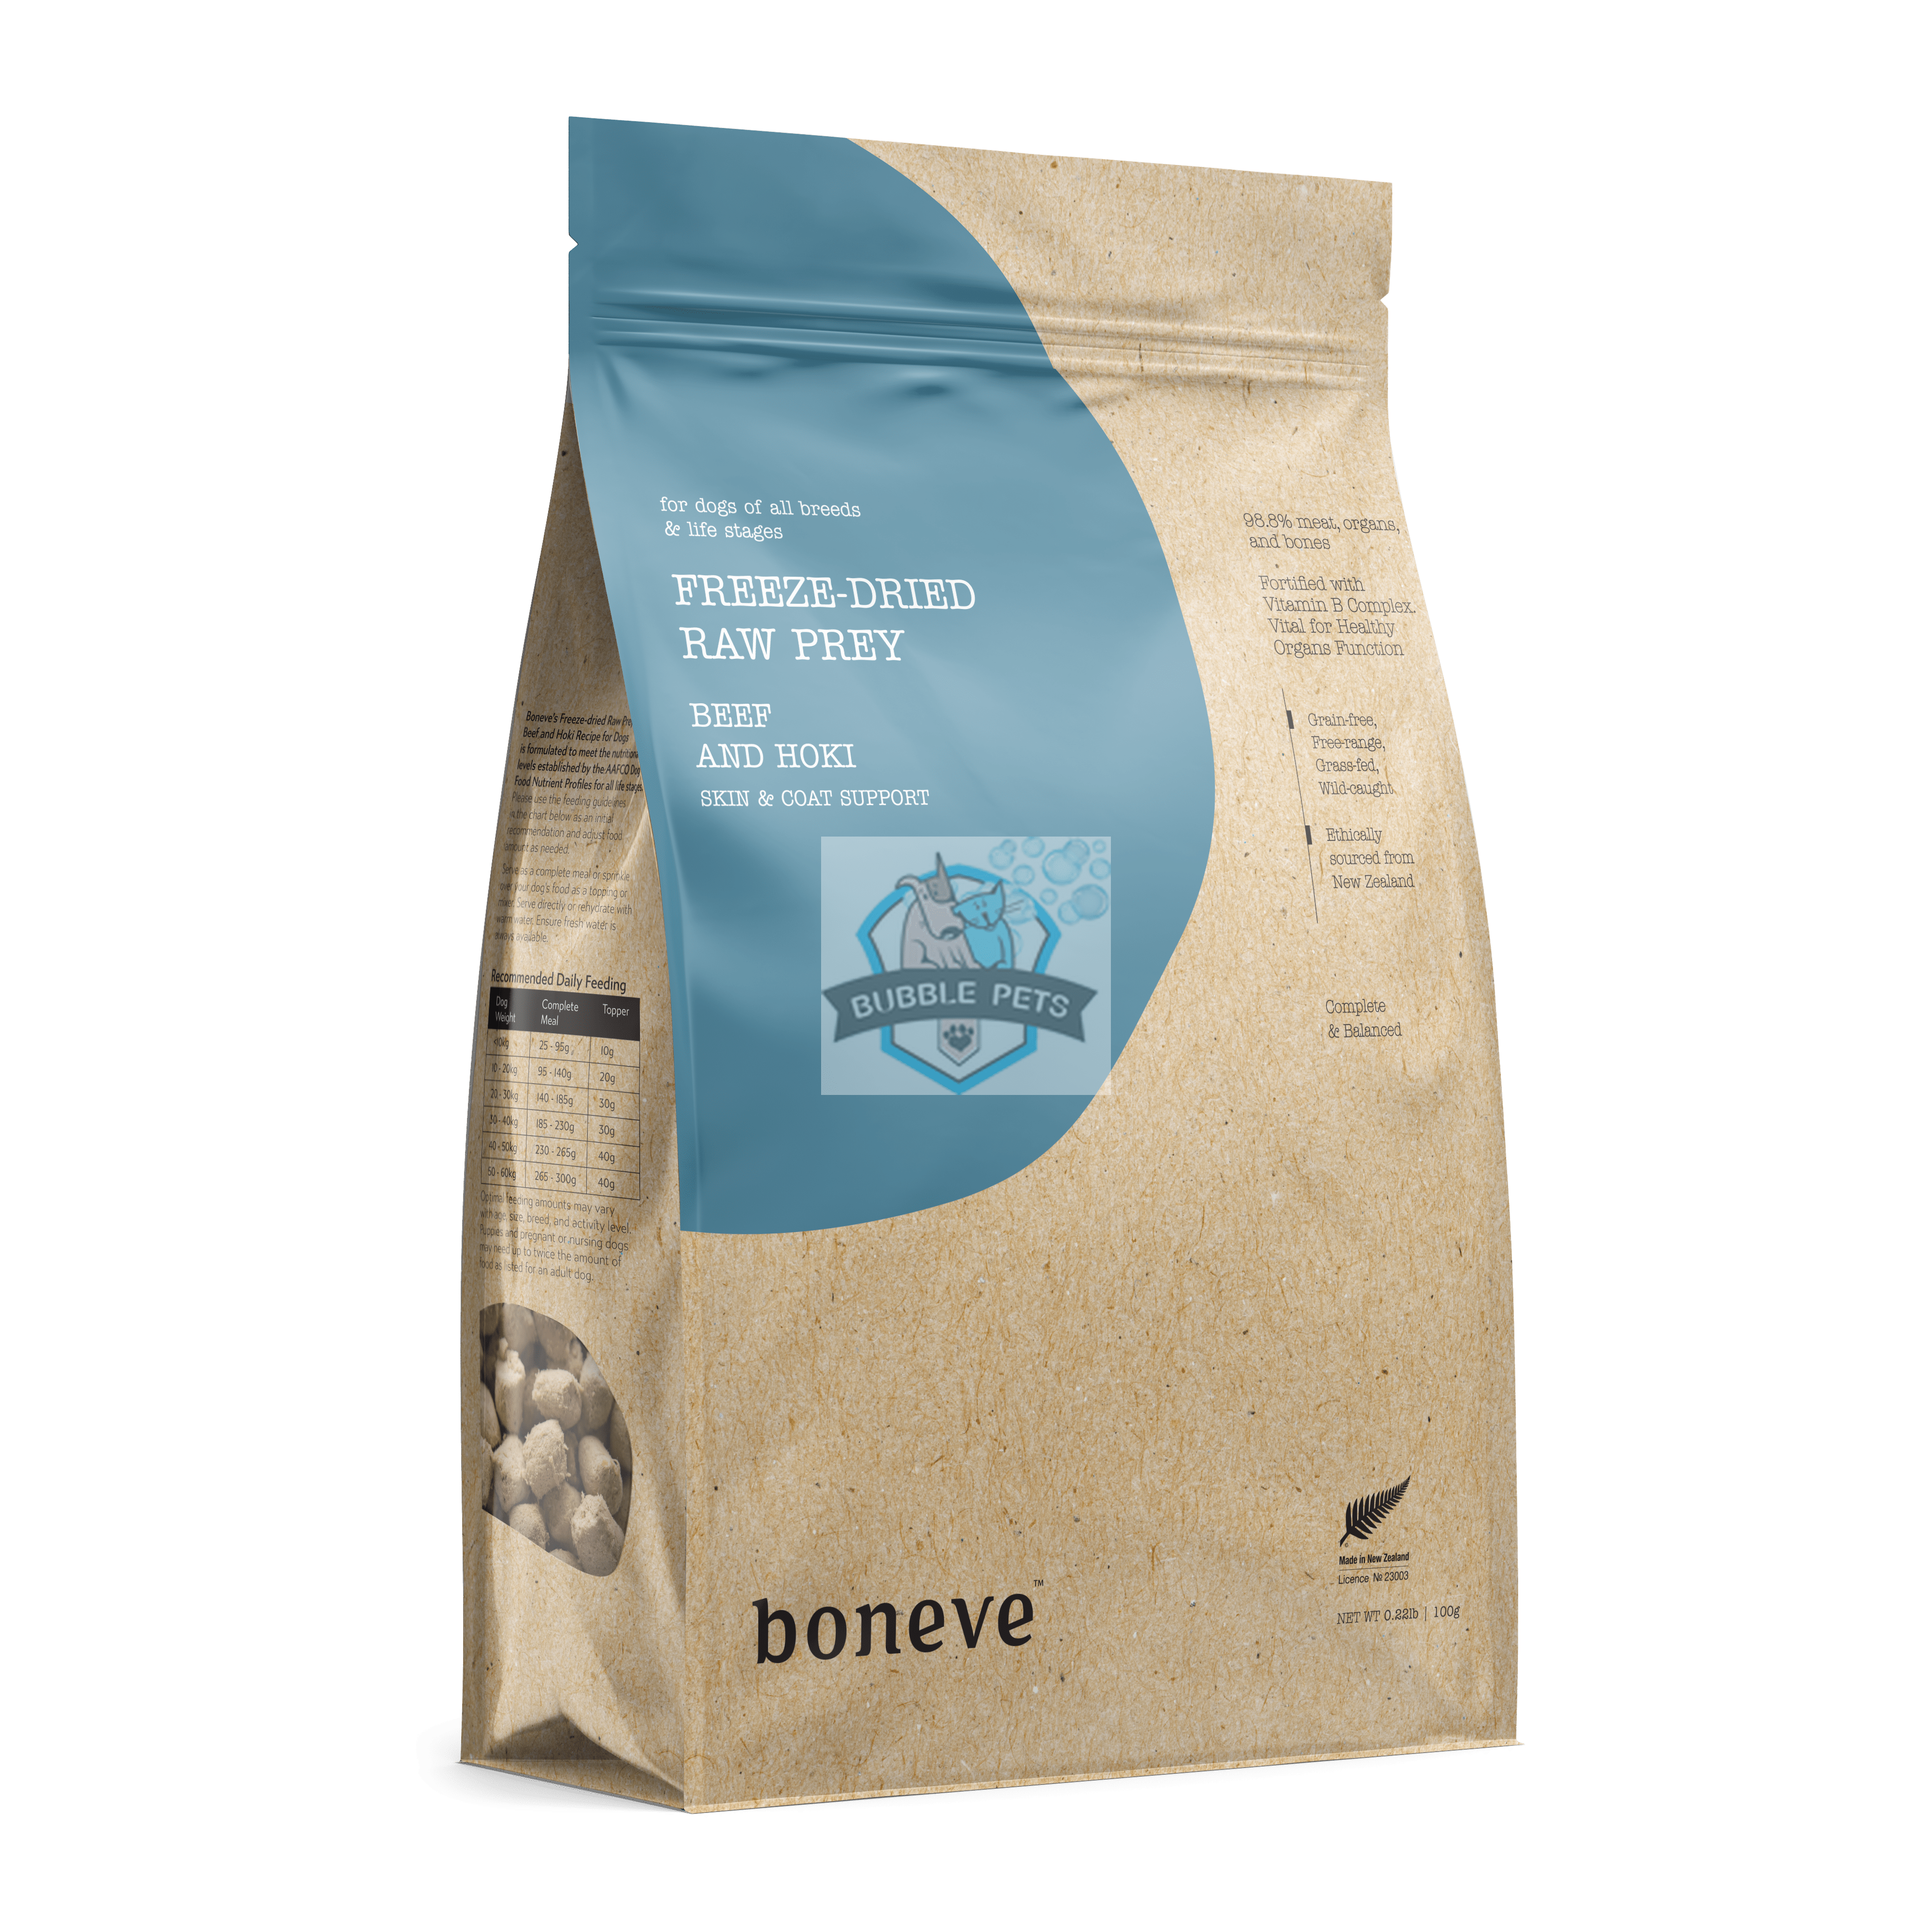 PROMO: ANY 2 FOR $105 Boneve Freeze Dried Food 340g